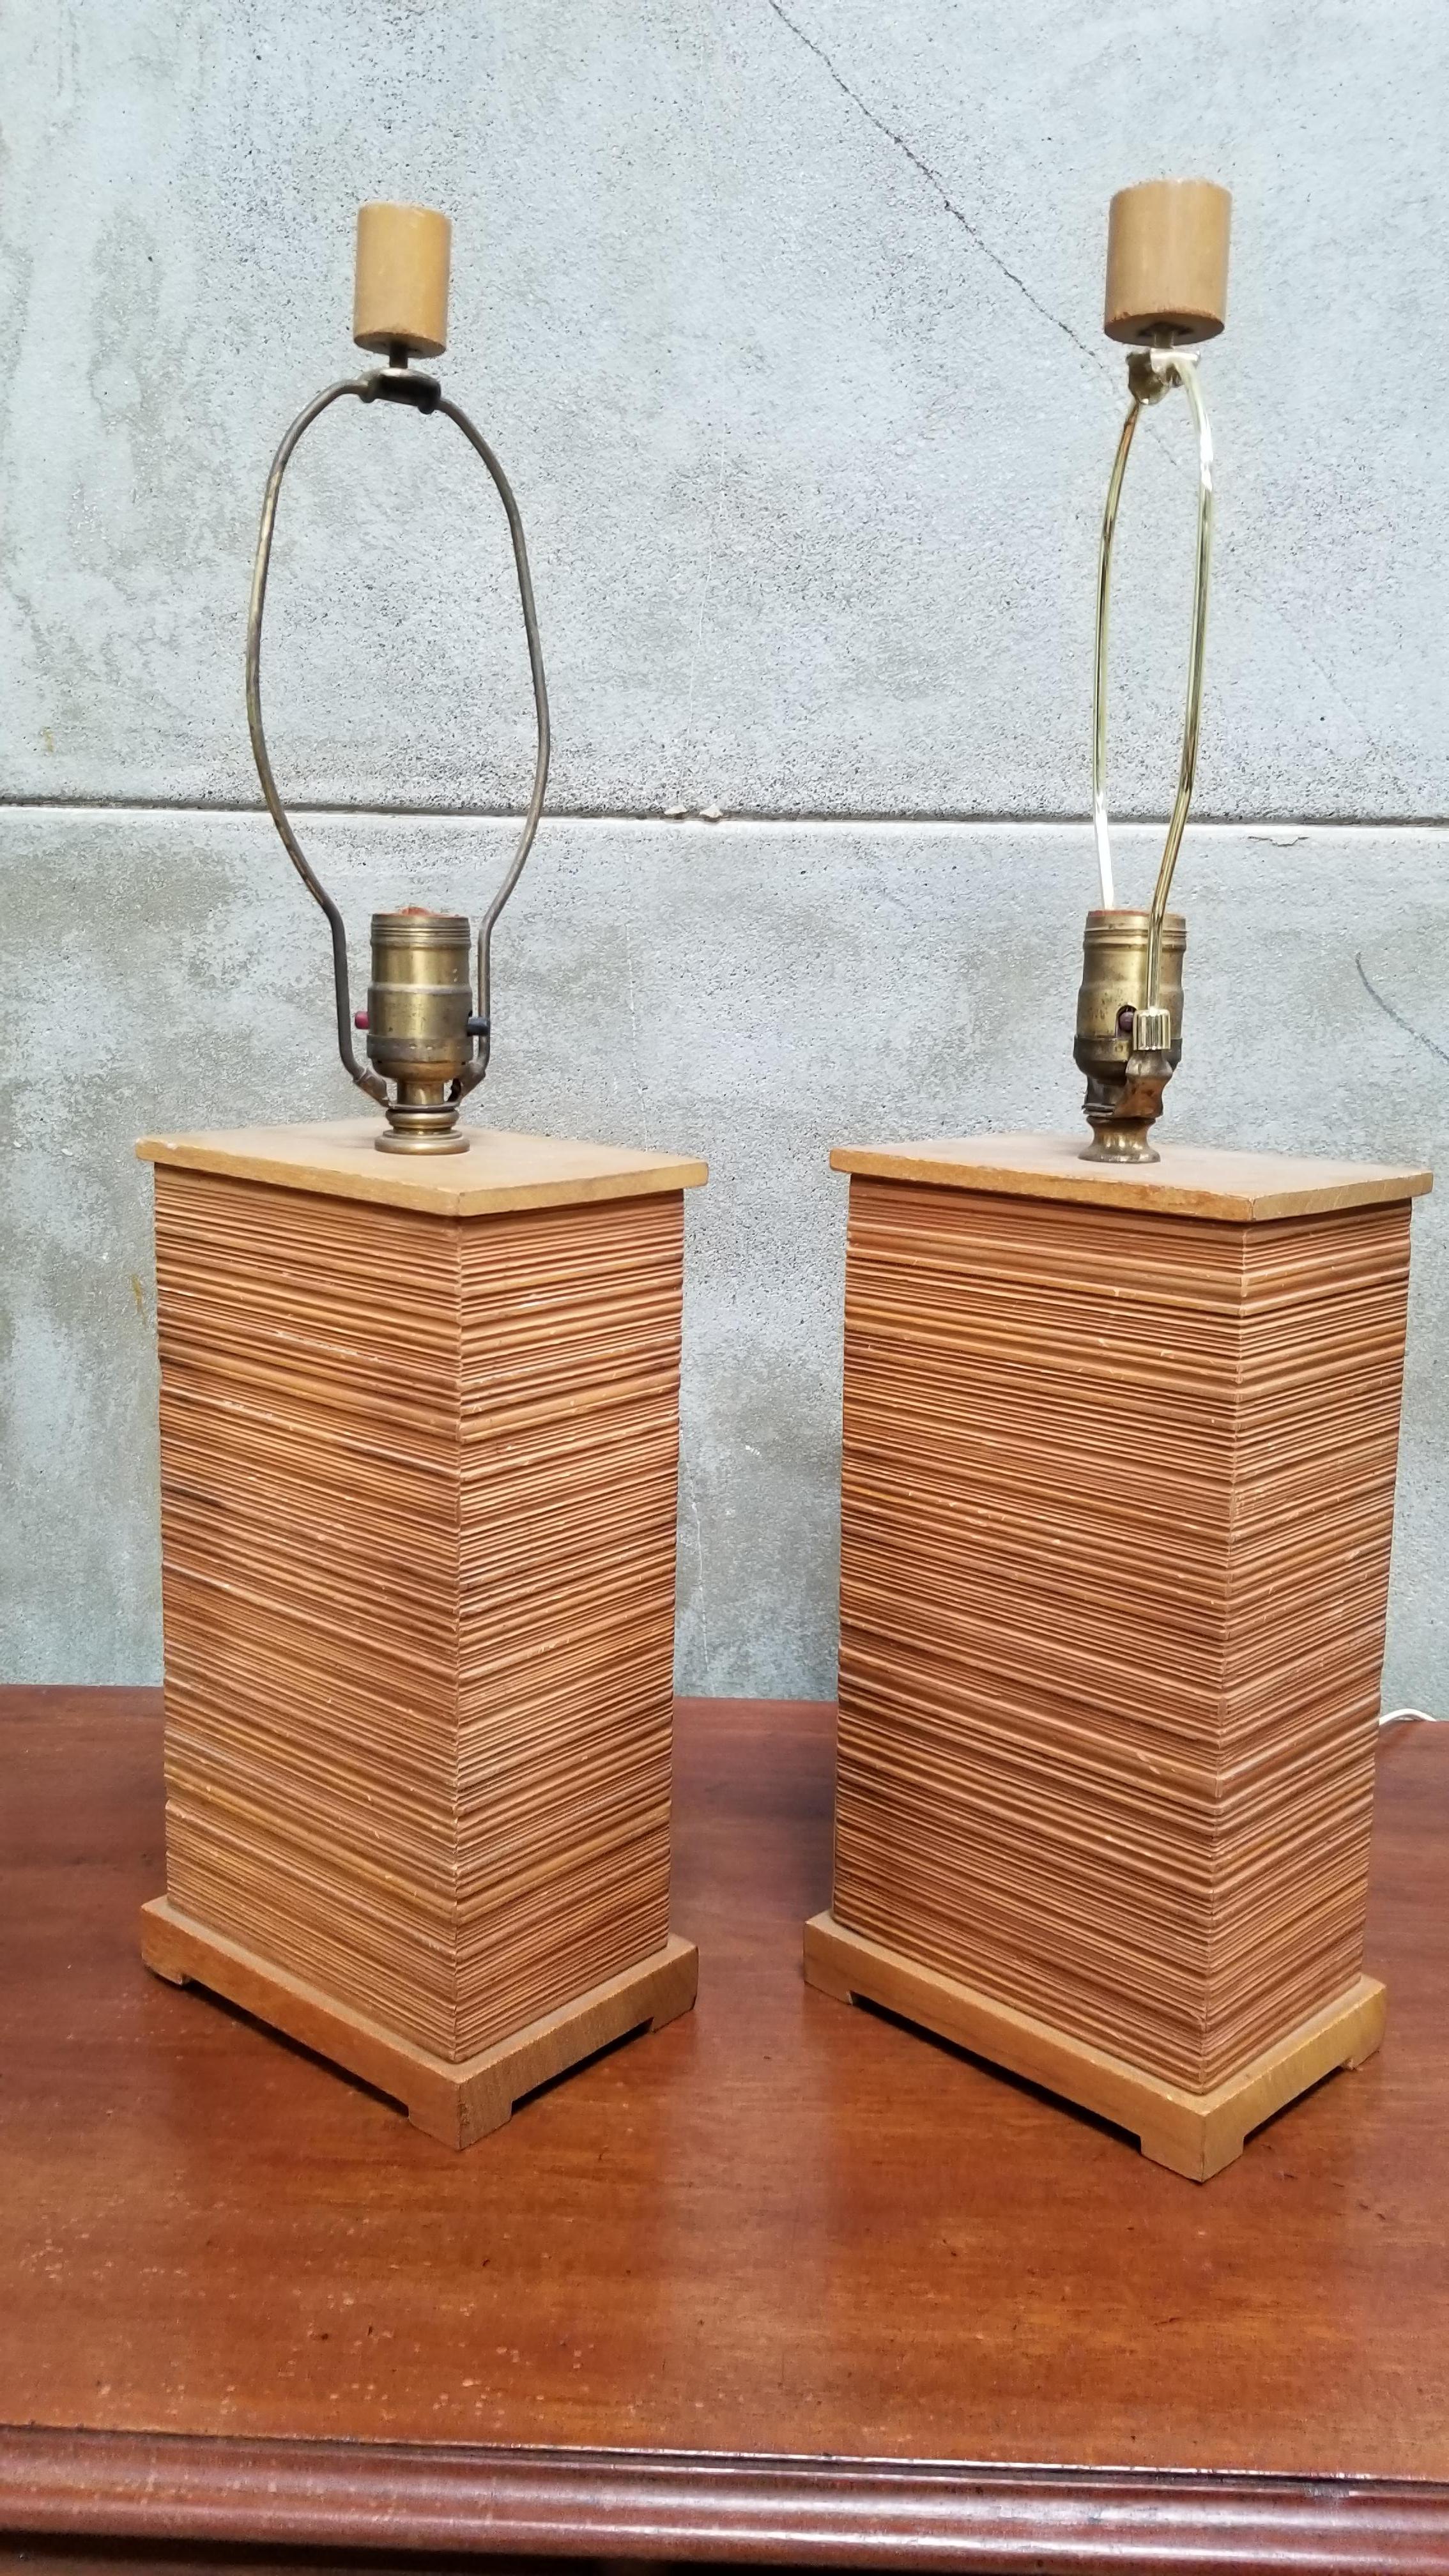 A scarce pair of Mid-Century Modern combed fir table lamps designed by Paul Frankl for Brown-Saltman. Very good, vintage condition with original finish. Original turned wood finials. Original working wiring. Bases only, without sockets measure 6.5